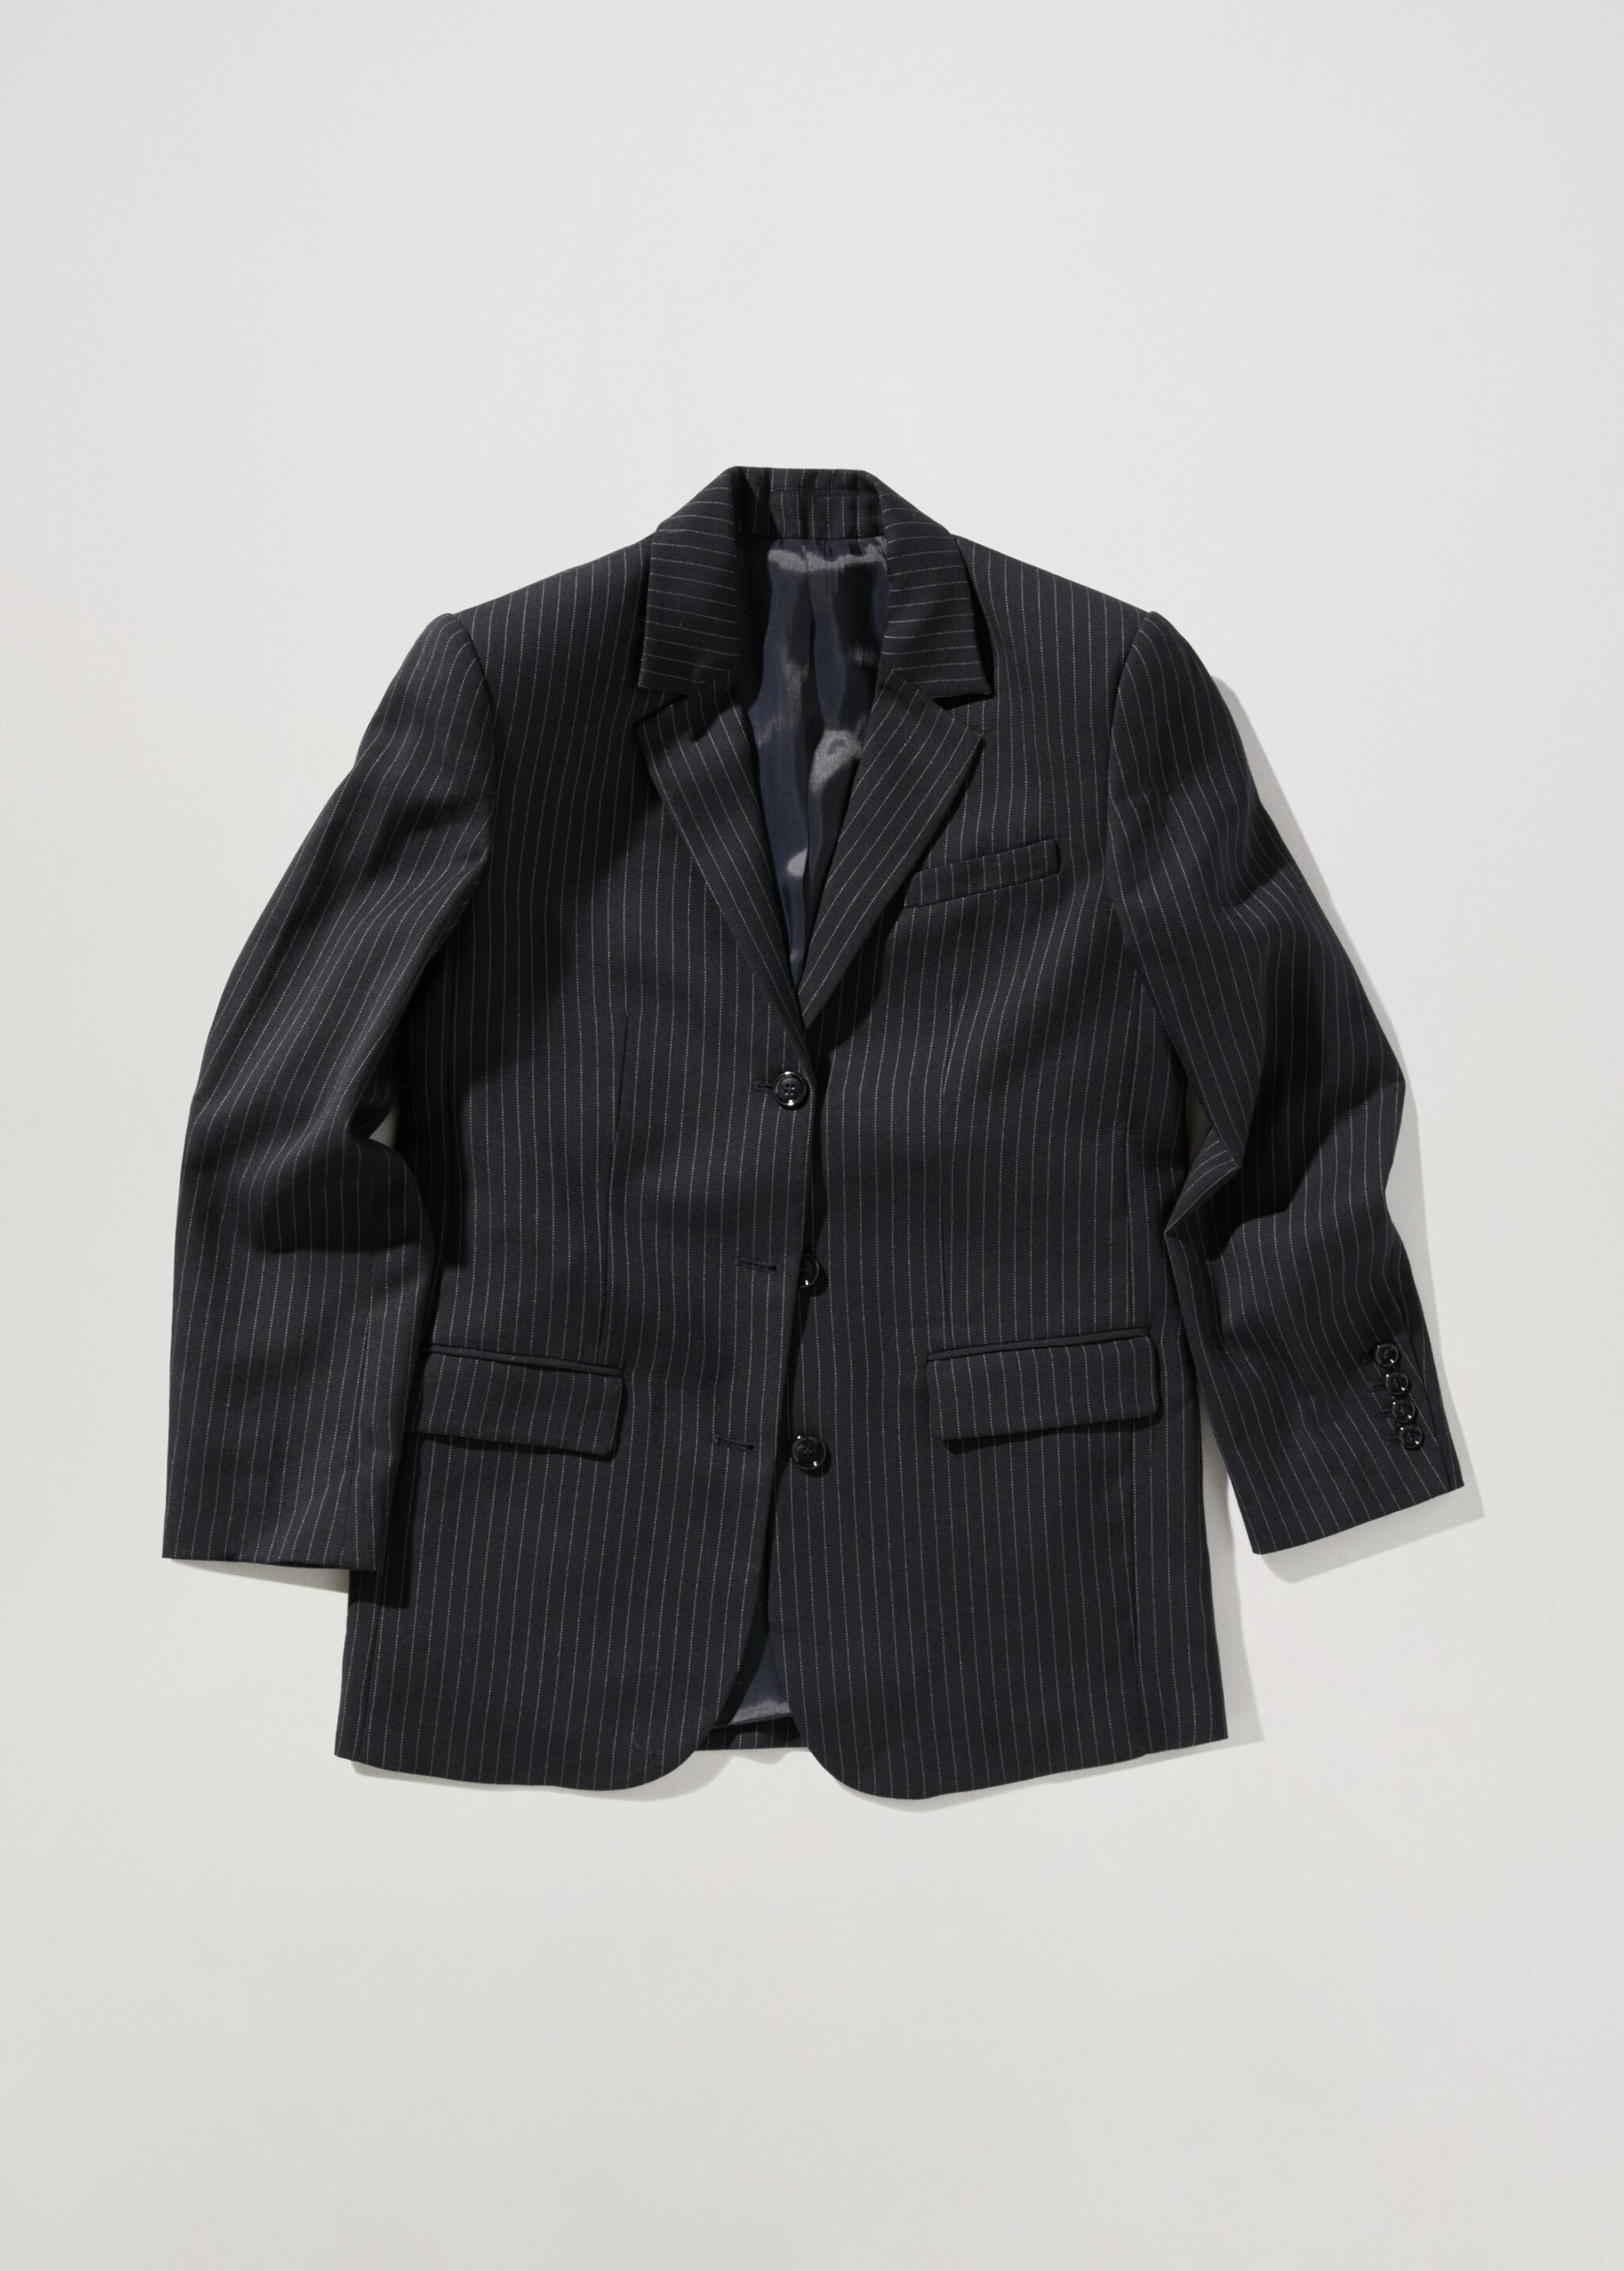 Pinstripe wool suit jacket - Article without model